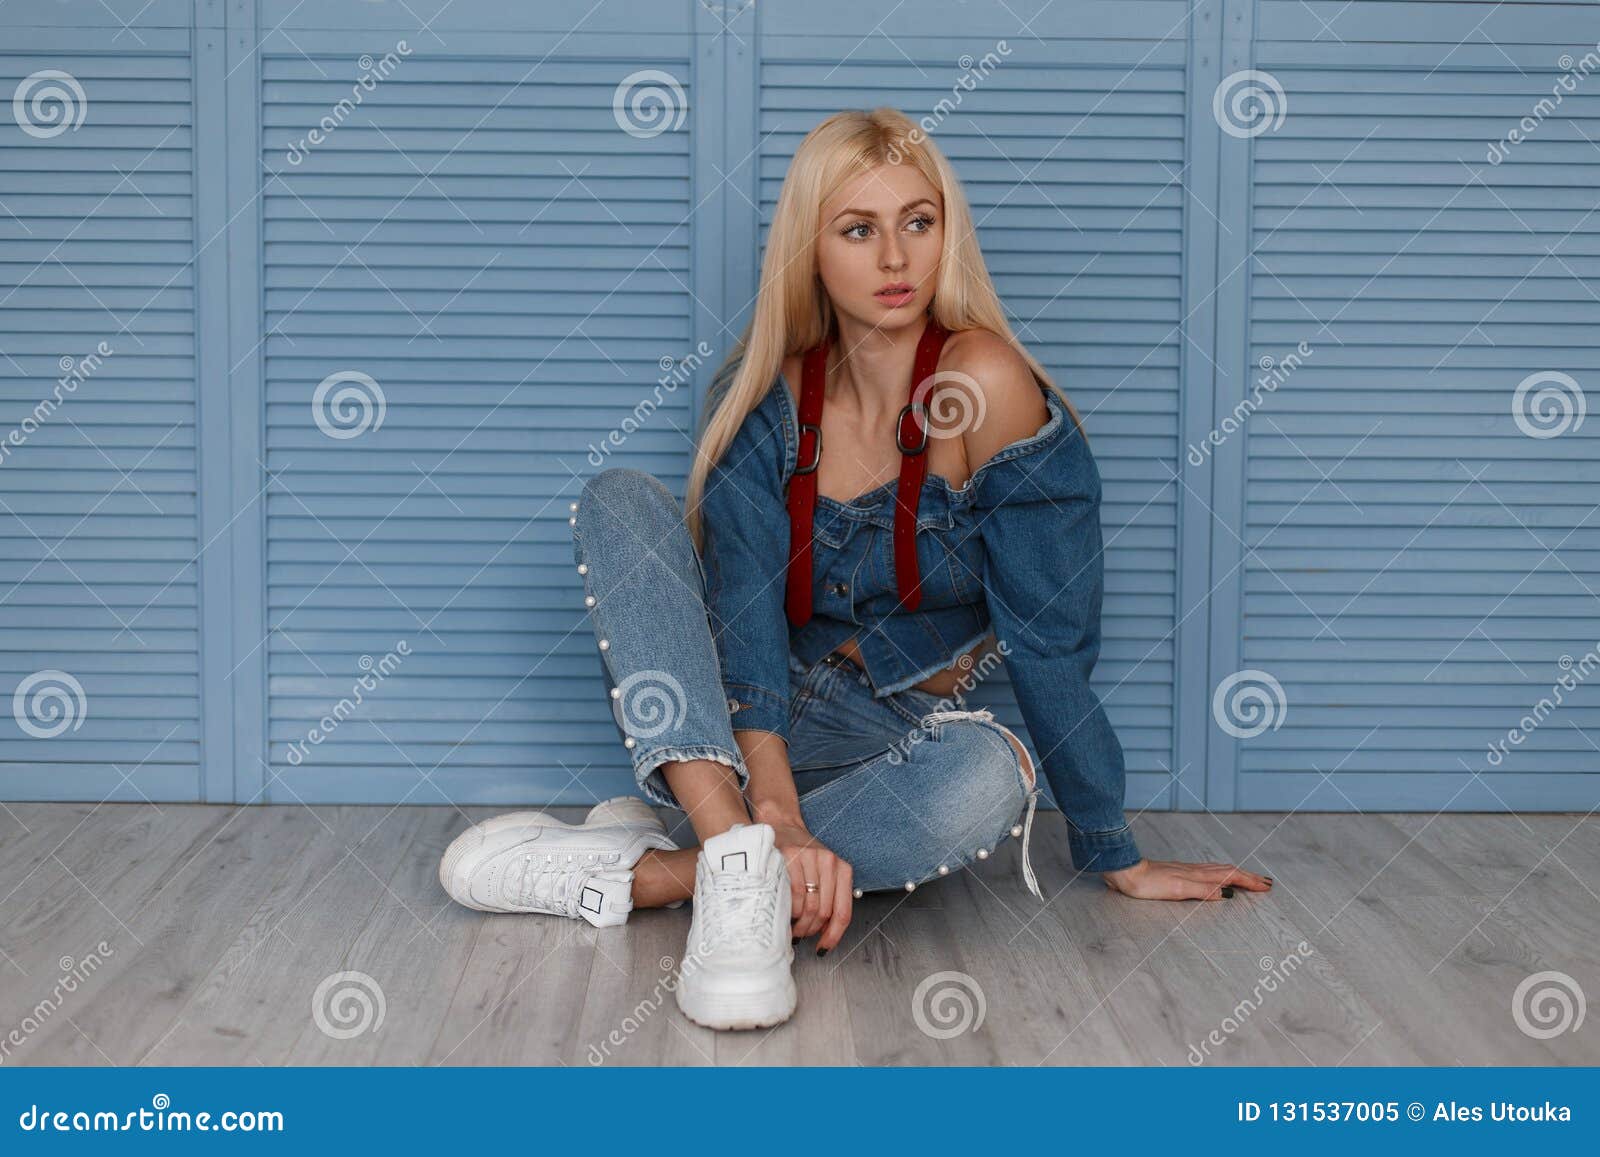 Stylish Blonde Woman In A Denim Shirt With Red Belts And Blue Jeans With White Shoes Sits Near Blue Wooden Wall Stock Image Image Of Caucasian Person